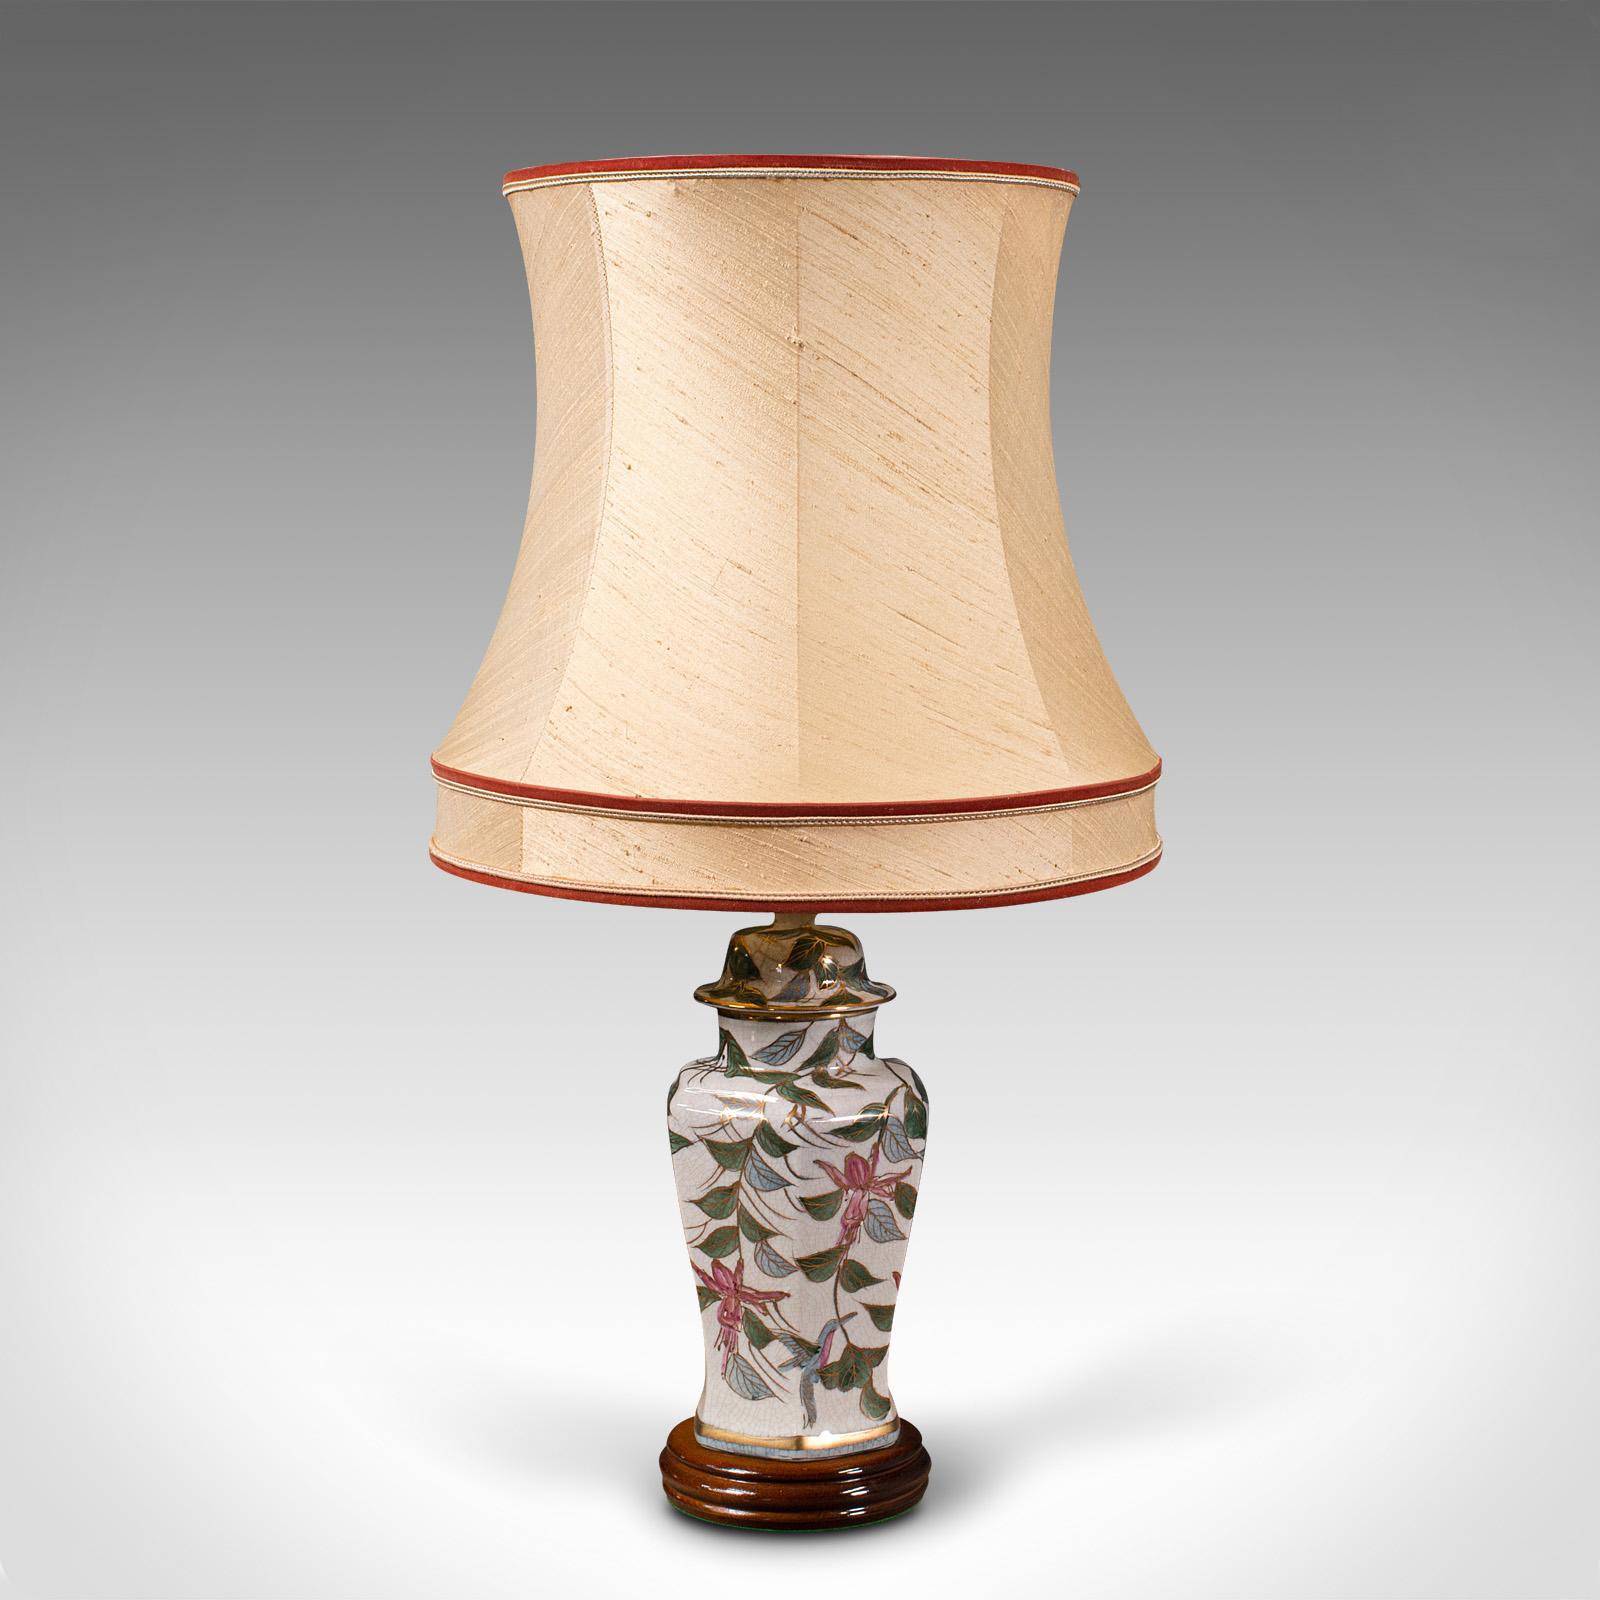 Vintage Table Lamp, Chinese, Ceramic, Decorative Light, Art Deco, Circa 1940 In Good Condition For Sale In Hele, Devon, GB